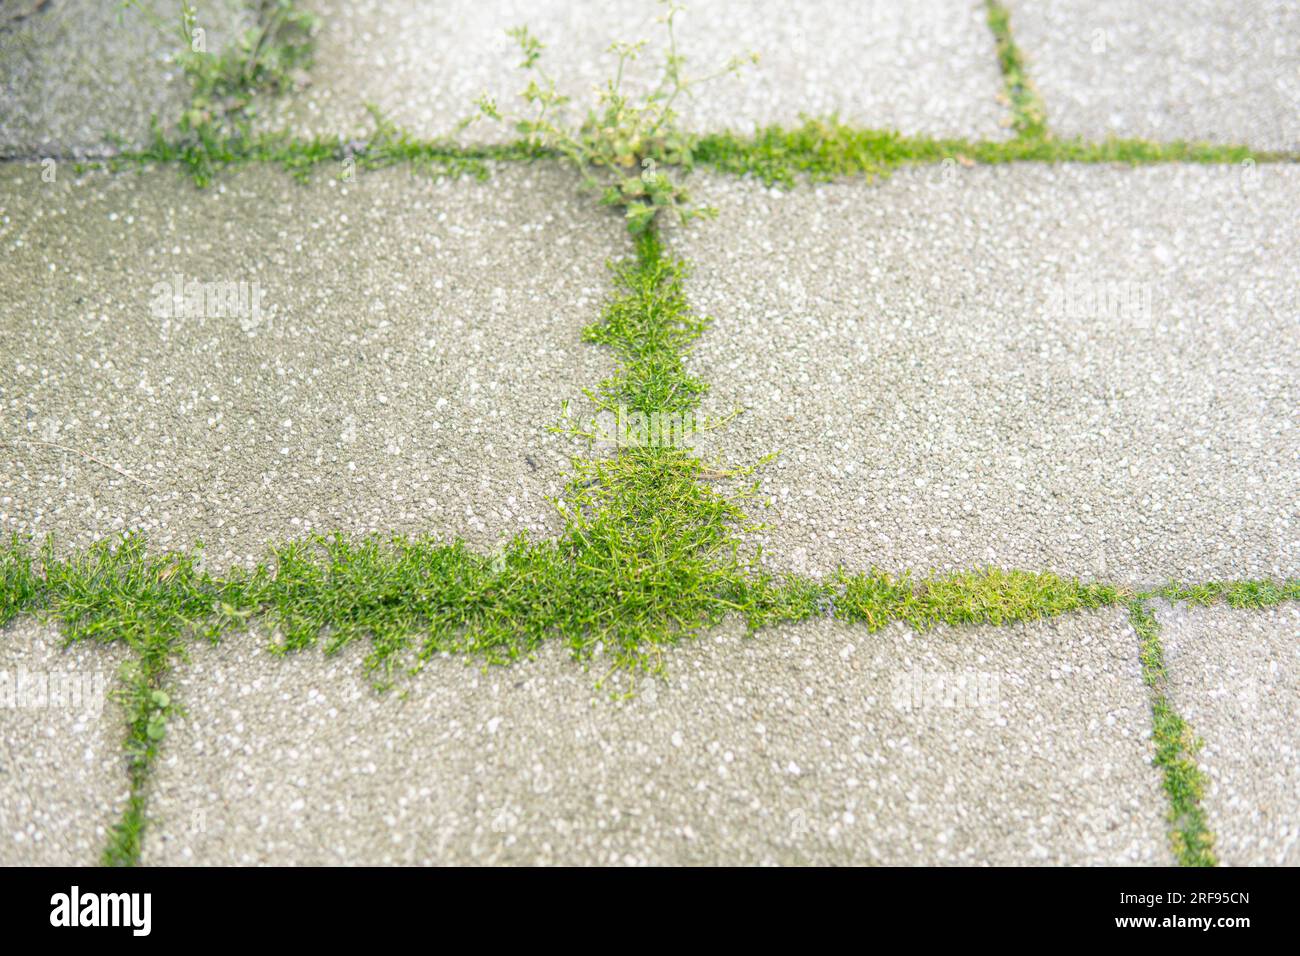 detail of small weeds growing between pieces of paving stones Stock Photo